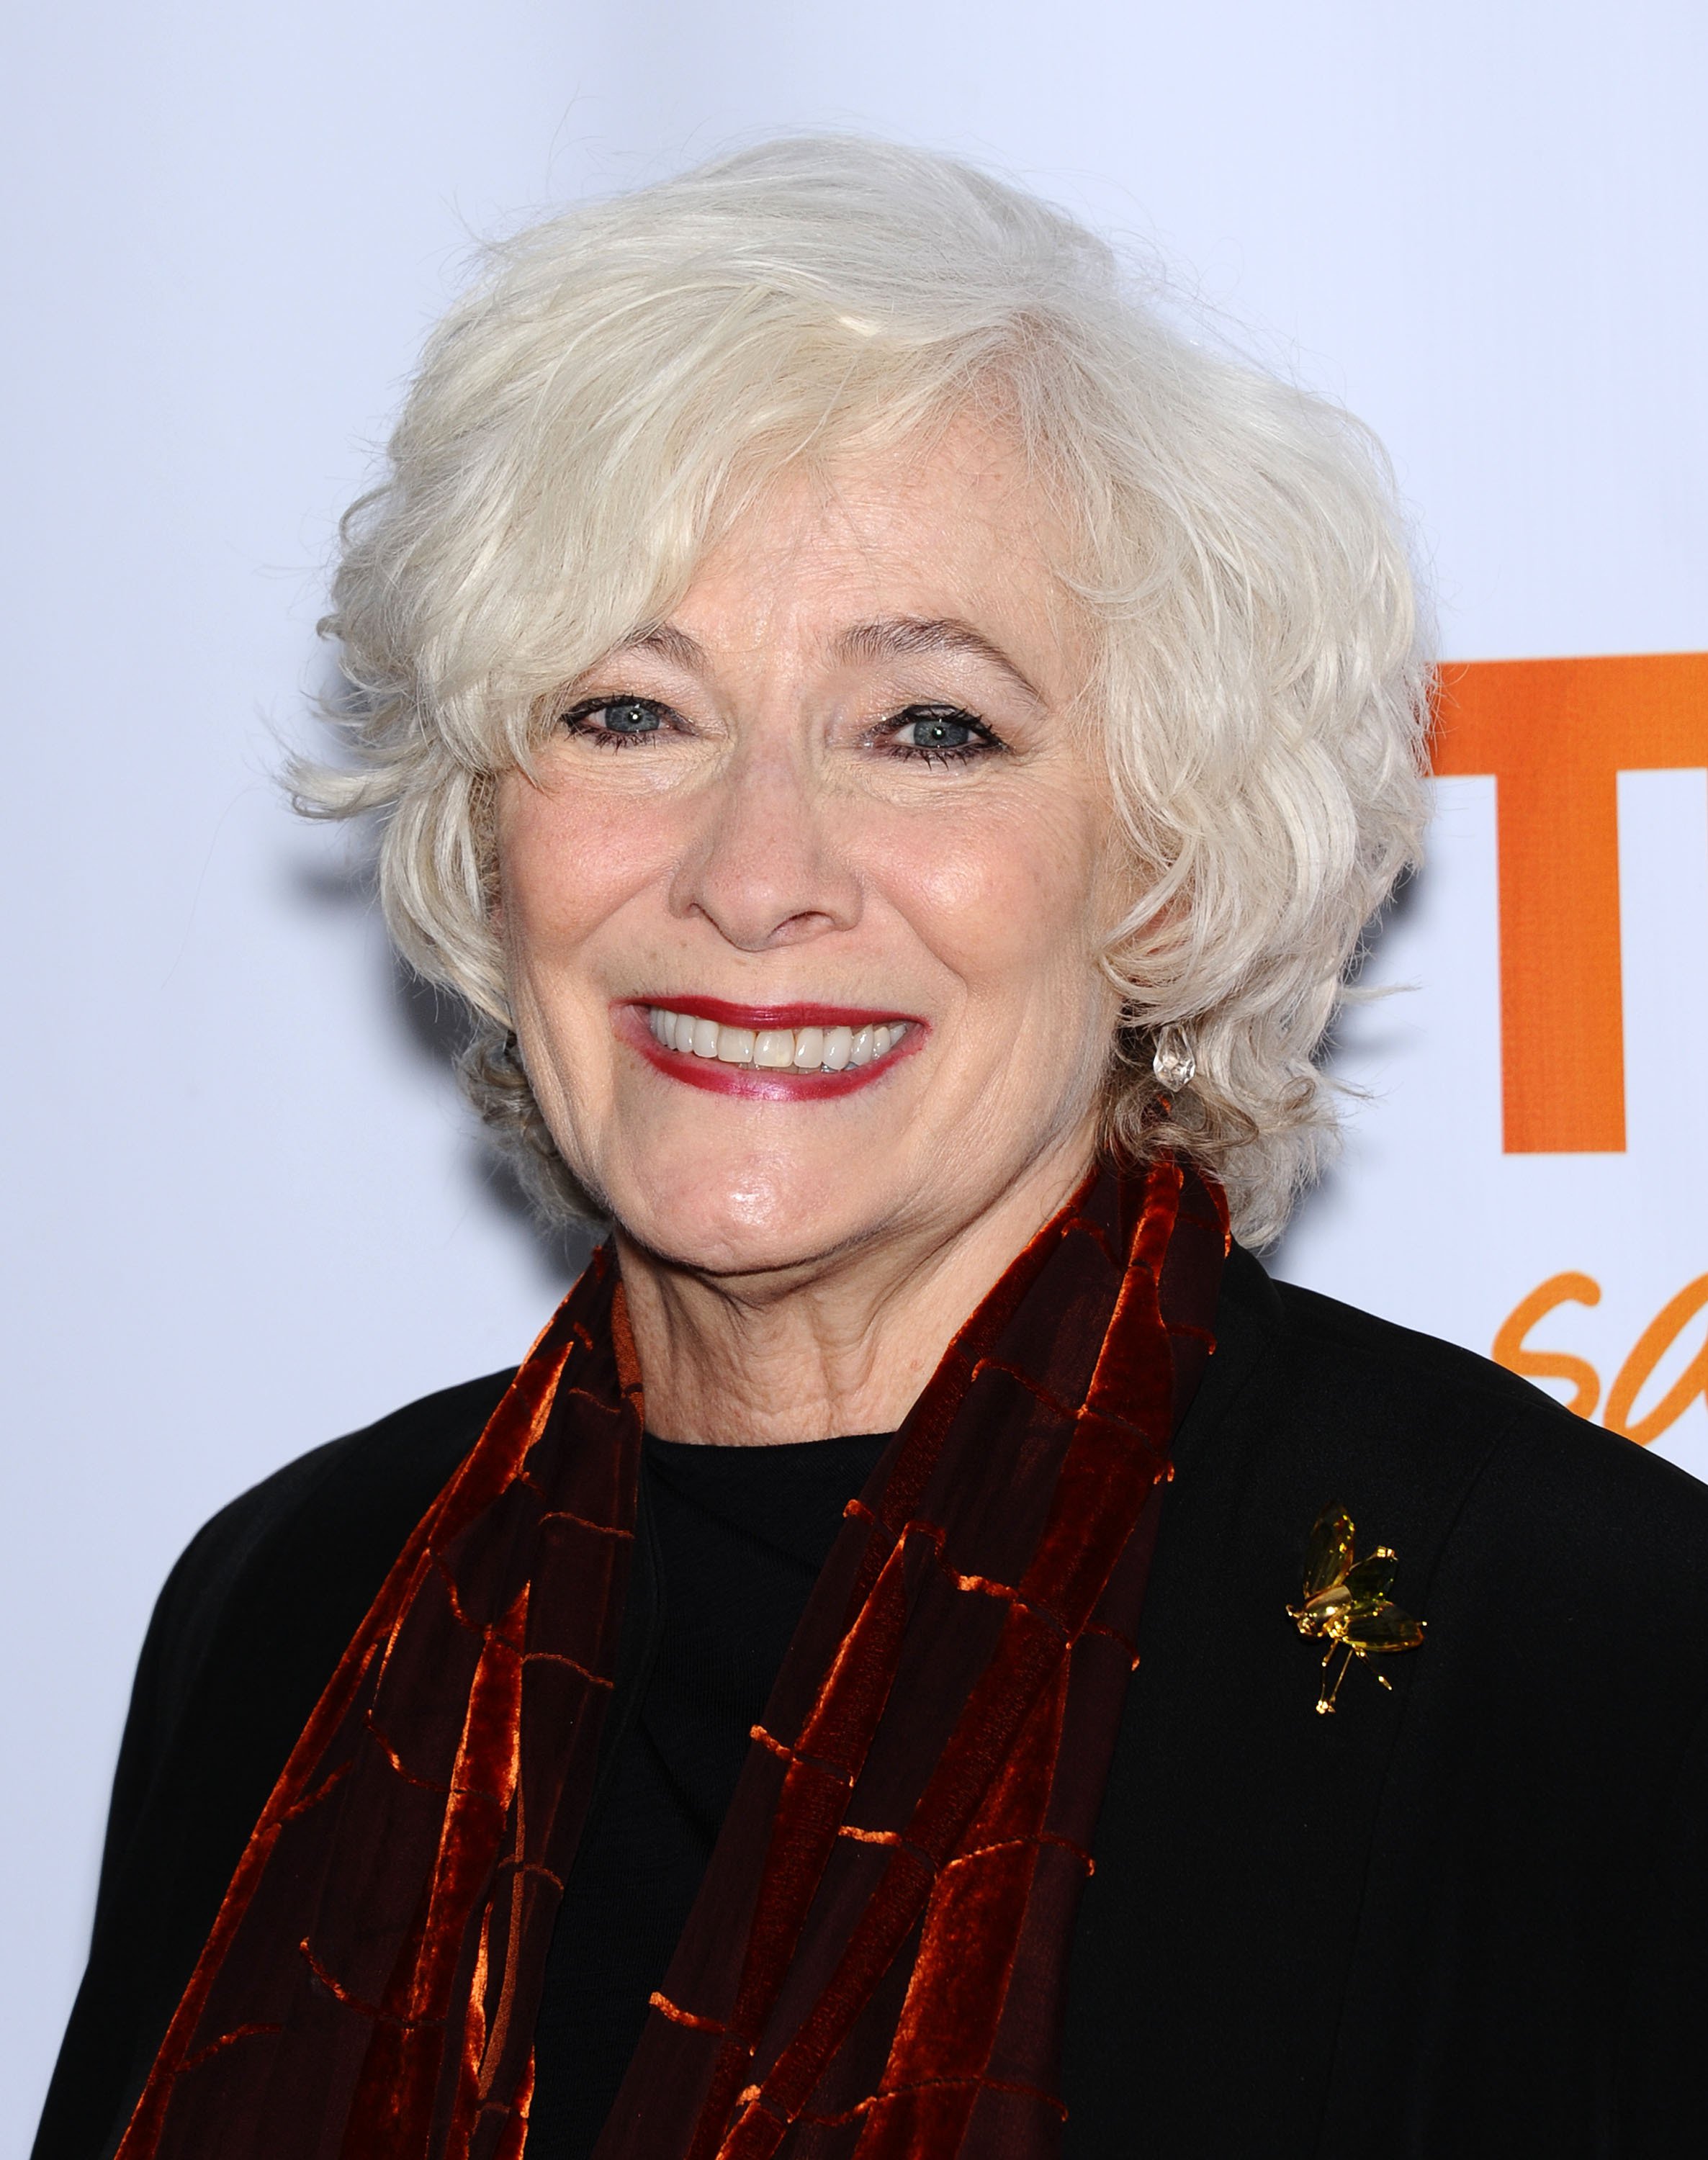 Betty Buckley arrives to Trevor Project Honors Katy Perry on December 2, 2012 in Hollywood, Los Angeles | Photo: Shutterstock